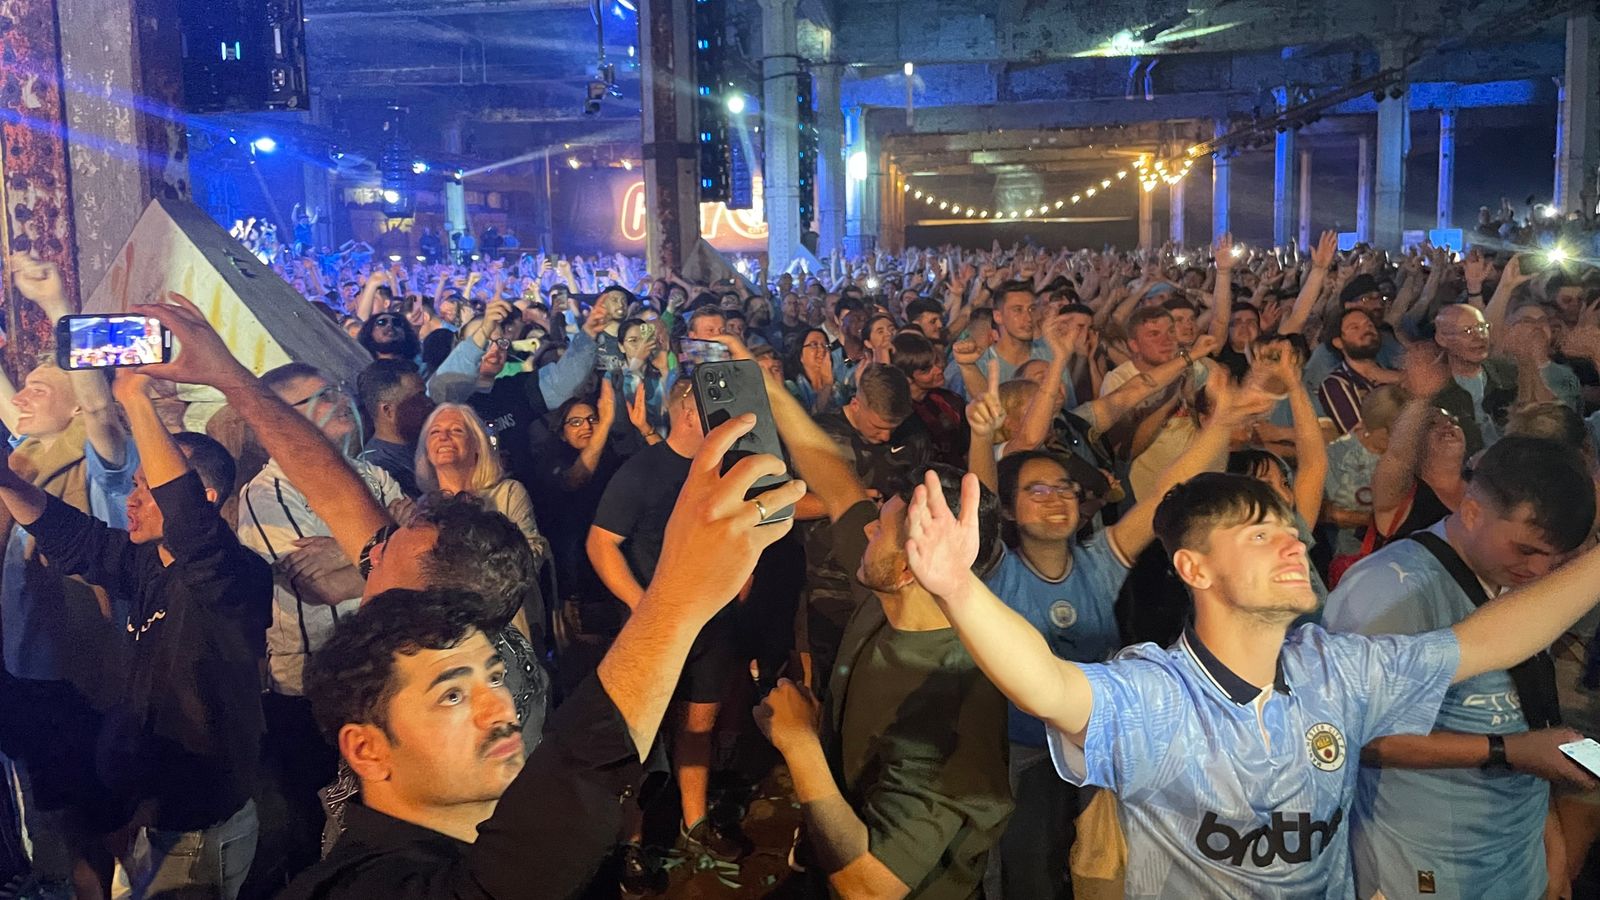 6,000 City fans gathered in Manchester to watch the final - this is what happened when they won